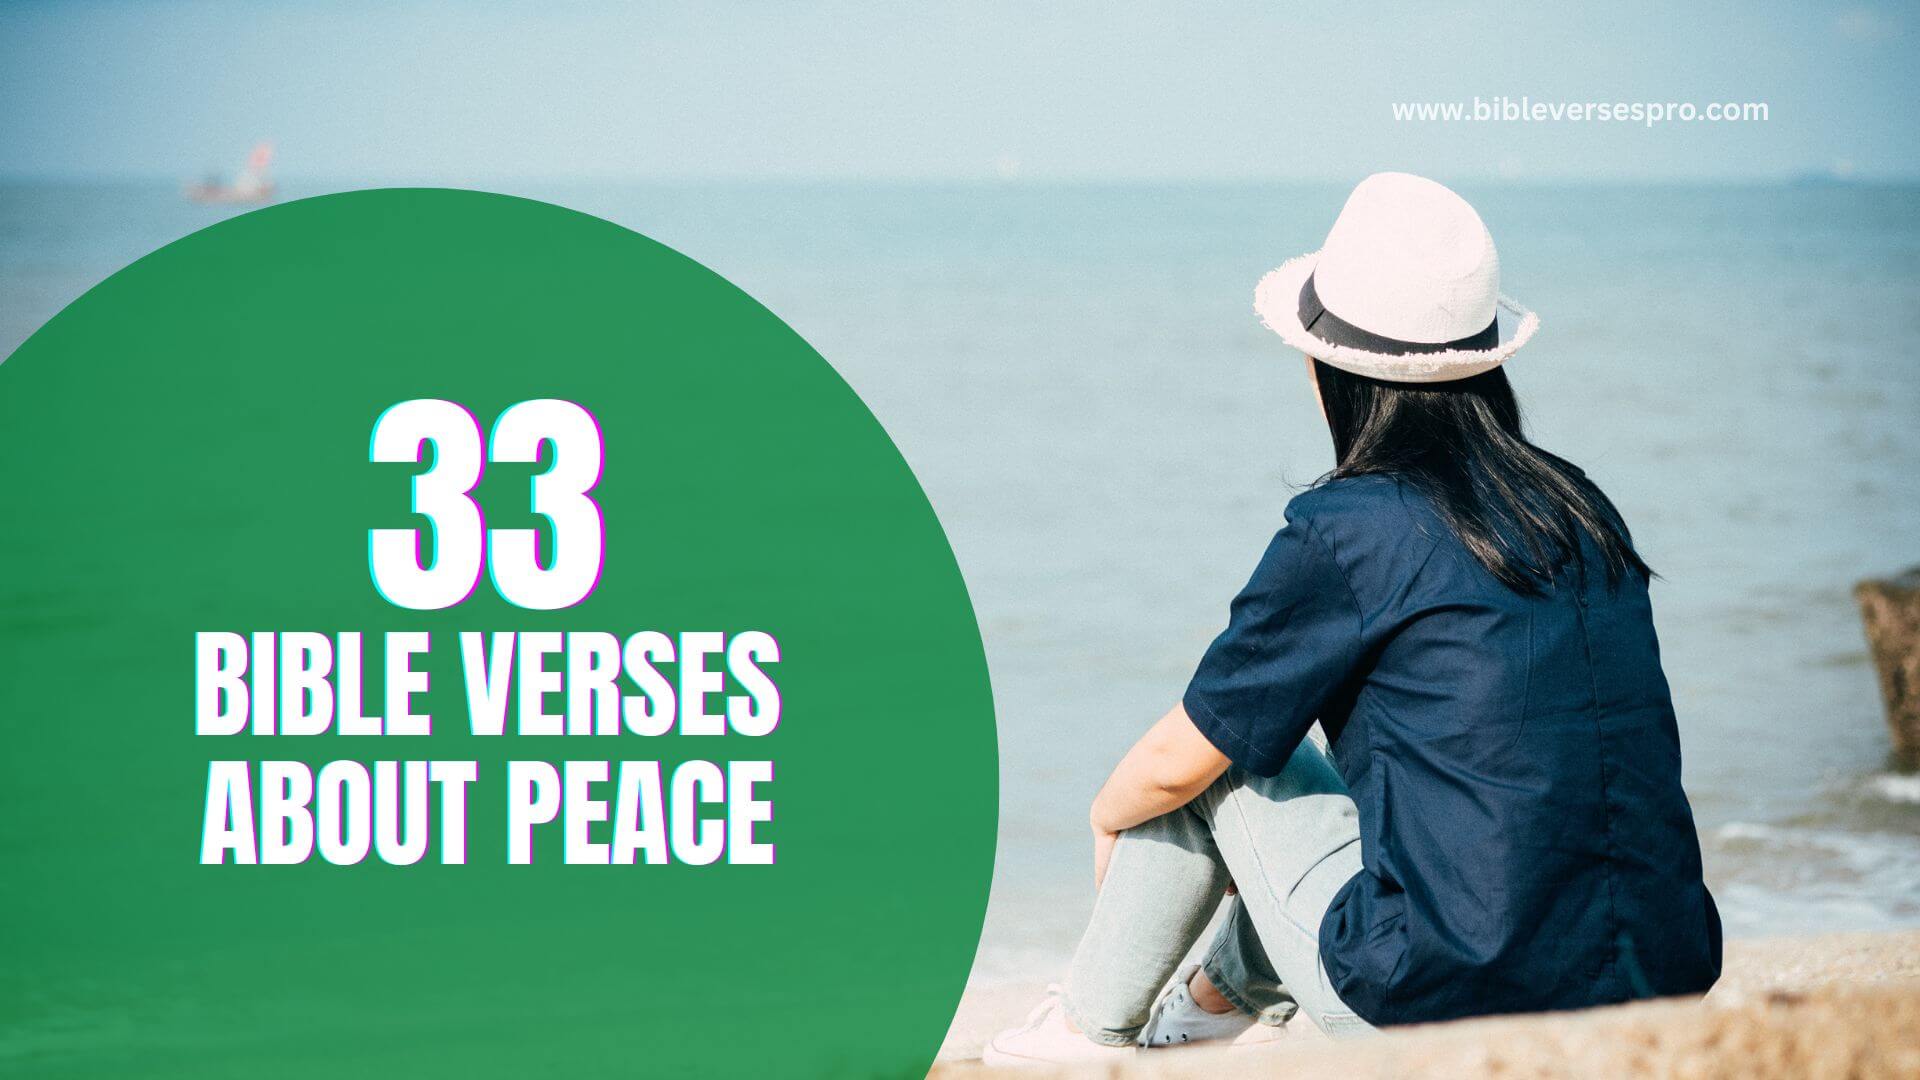 BIBLE VERSES ABOUT PEACE